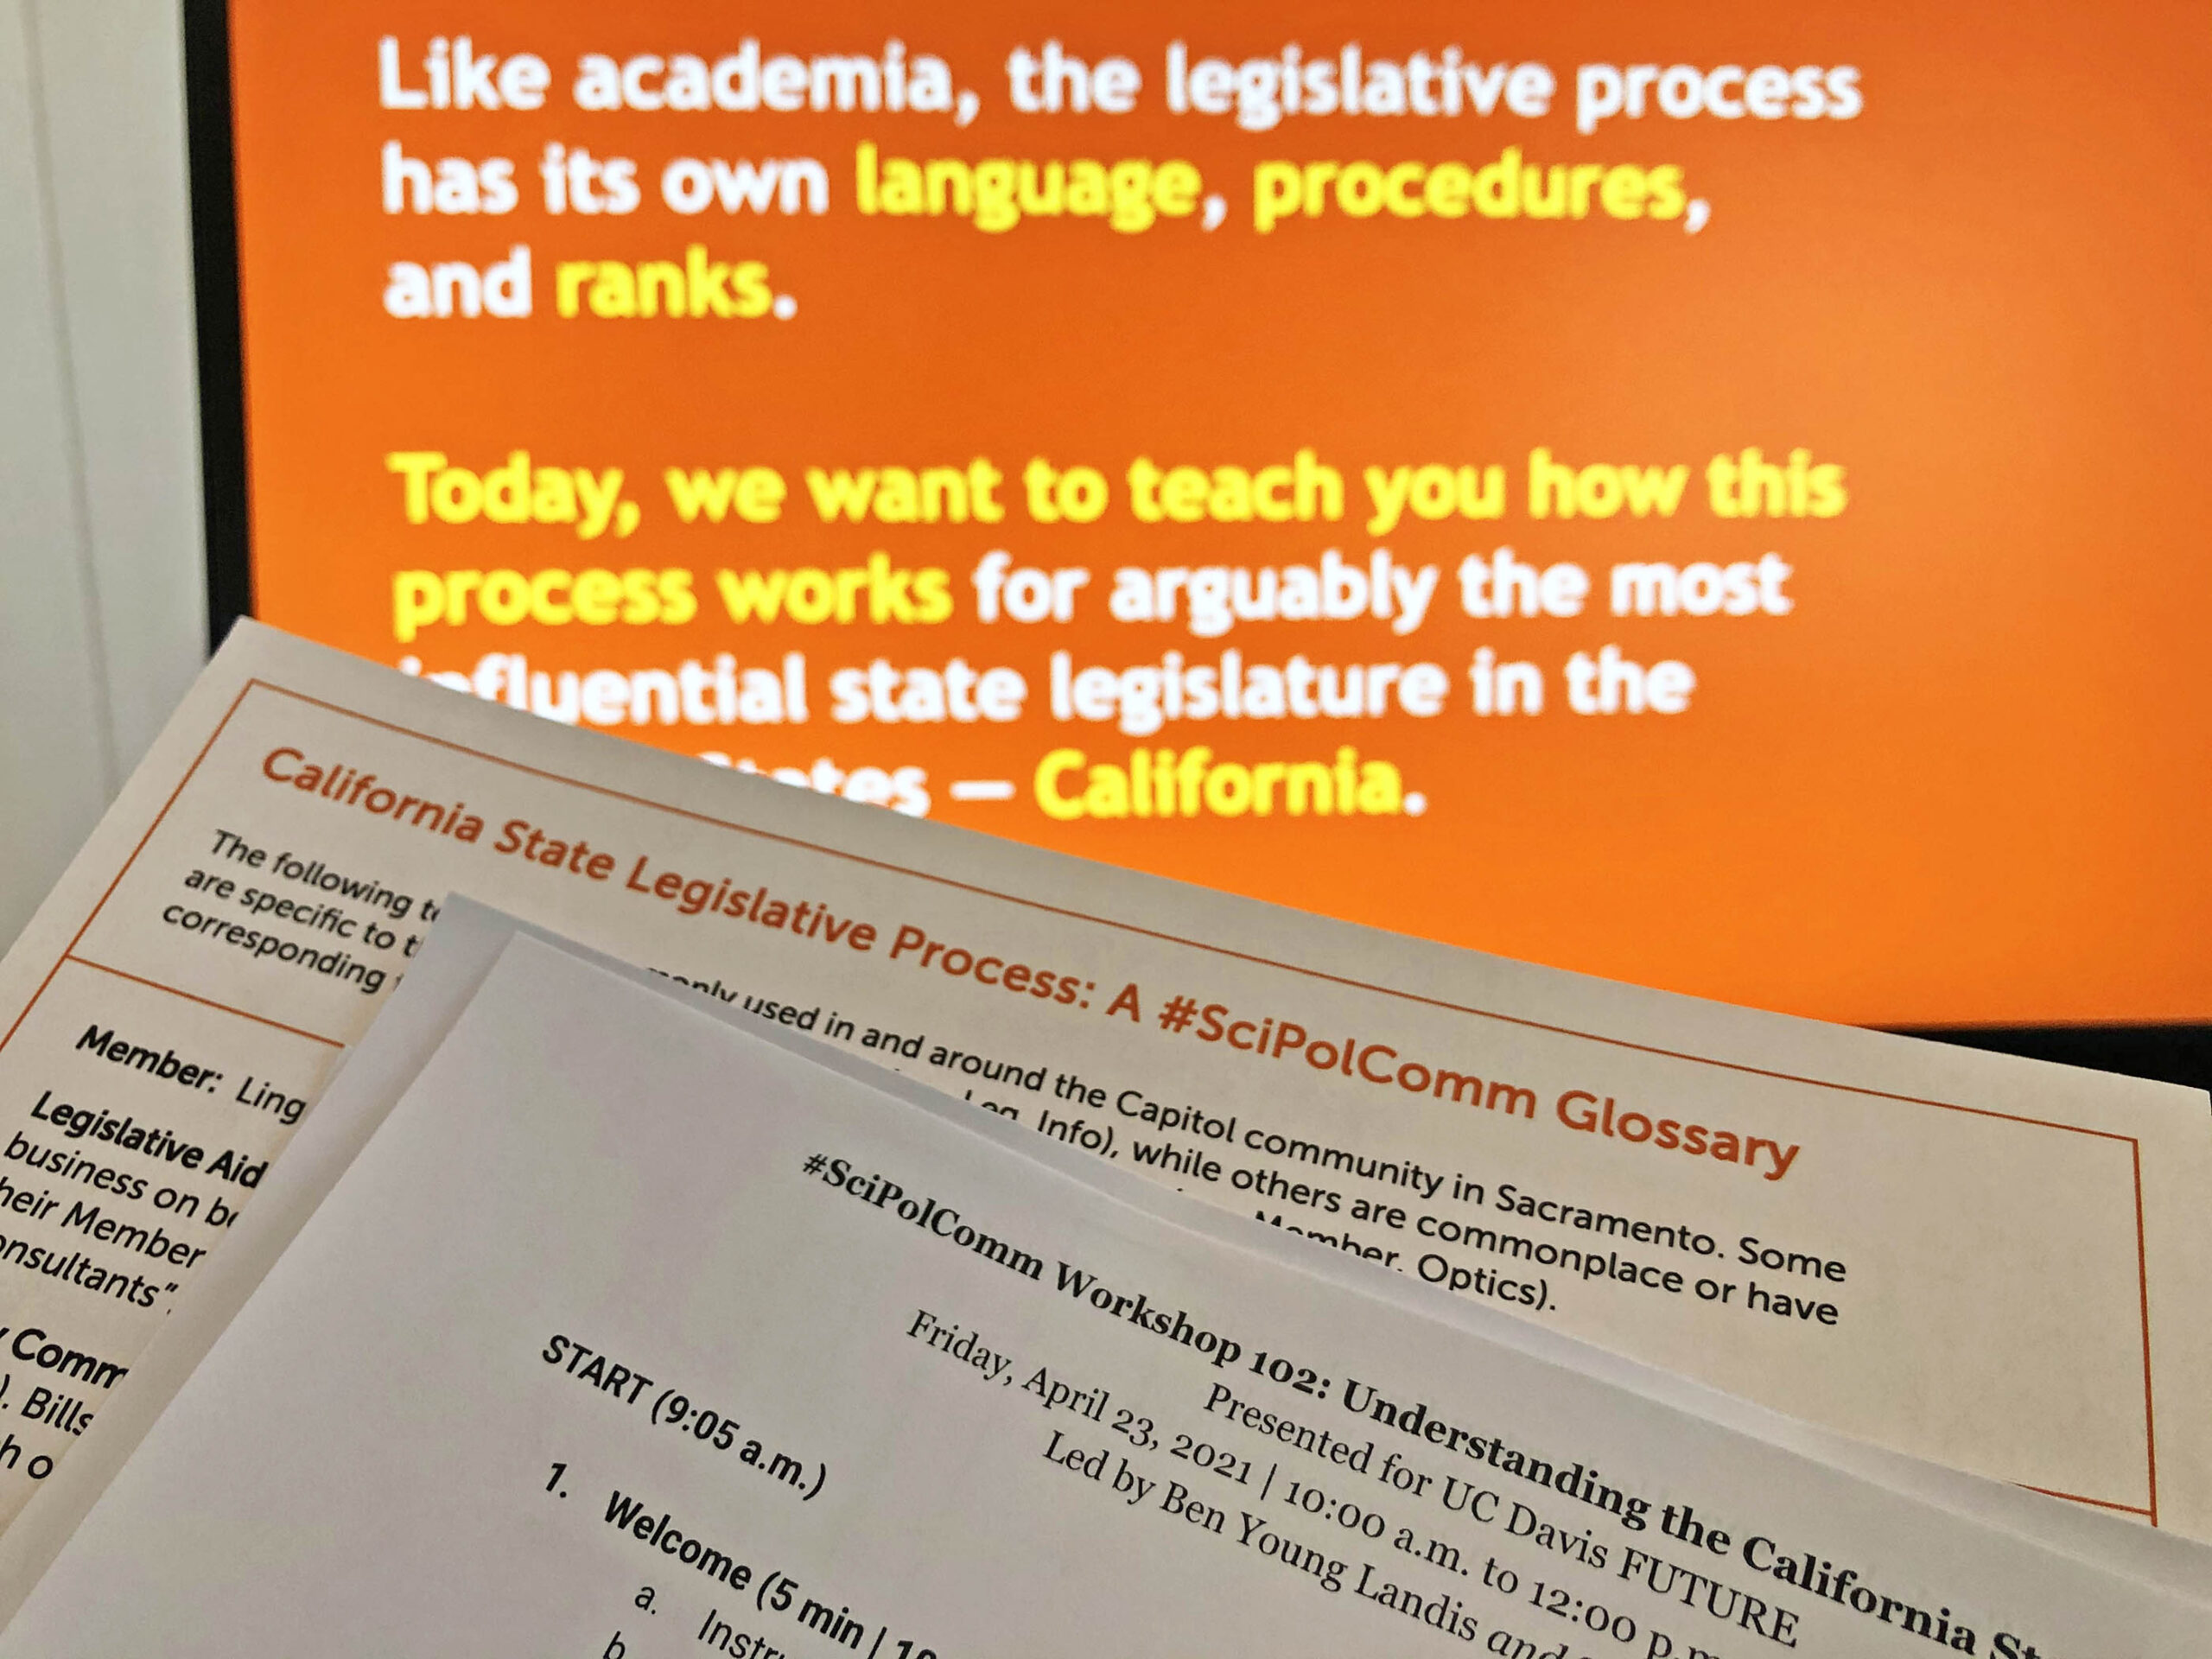 Photo of a pair of worksheets held up in front of a computer monitor. One worksheet reads: California State Legislative Process A hashtag Sci Pol Comm Glossary, while the other reads hashtag Sci Pol Comm Workshop 102. The monitor text is out of focus but reads "Like academia, the legislative process has its own language, procedures, and ranks. Today, we want to teach you how this process works for arguably the most influential state legislature in the United States em dash California